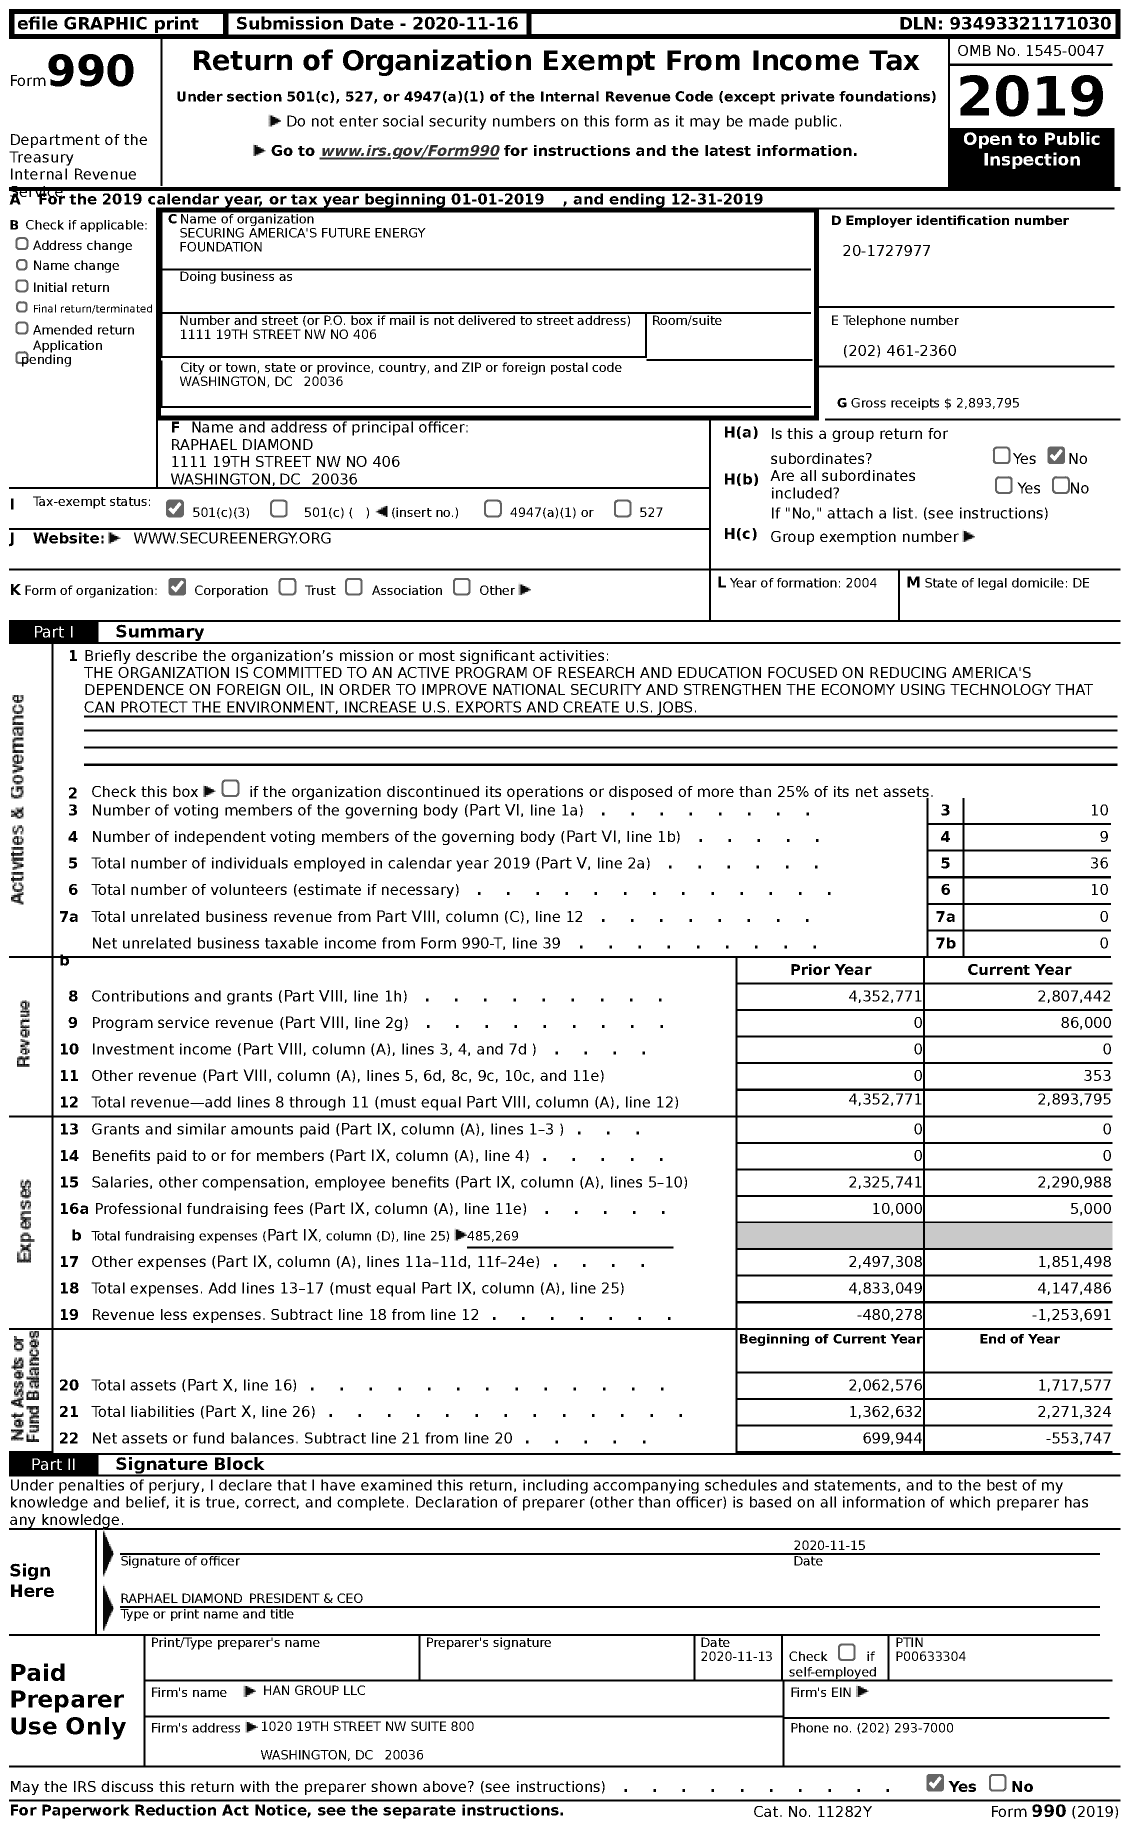 Image of first page of 2019 Form 990 for Securing America's Future Energy Foundation